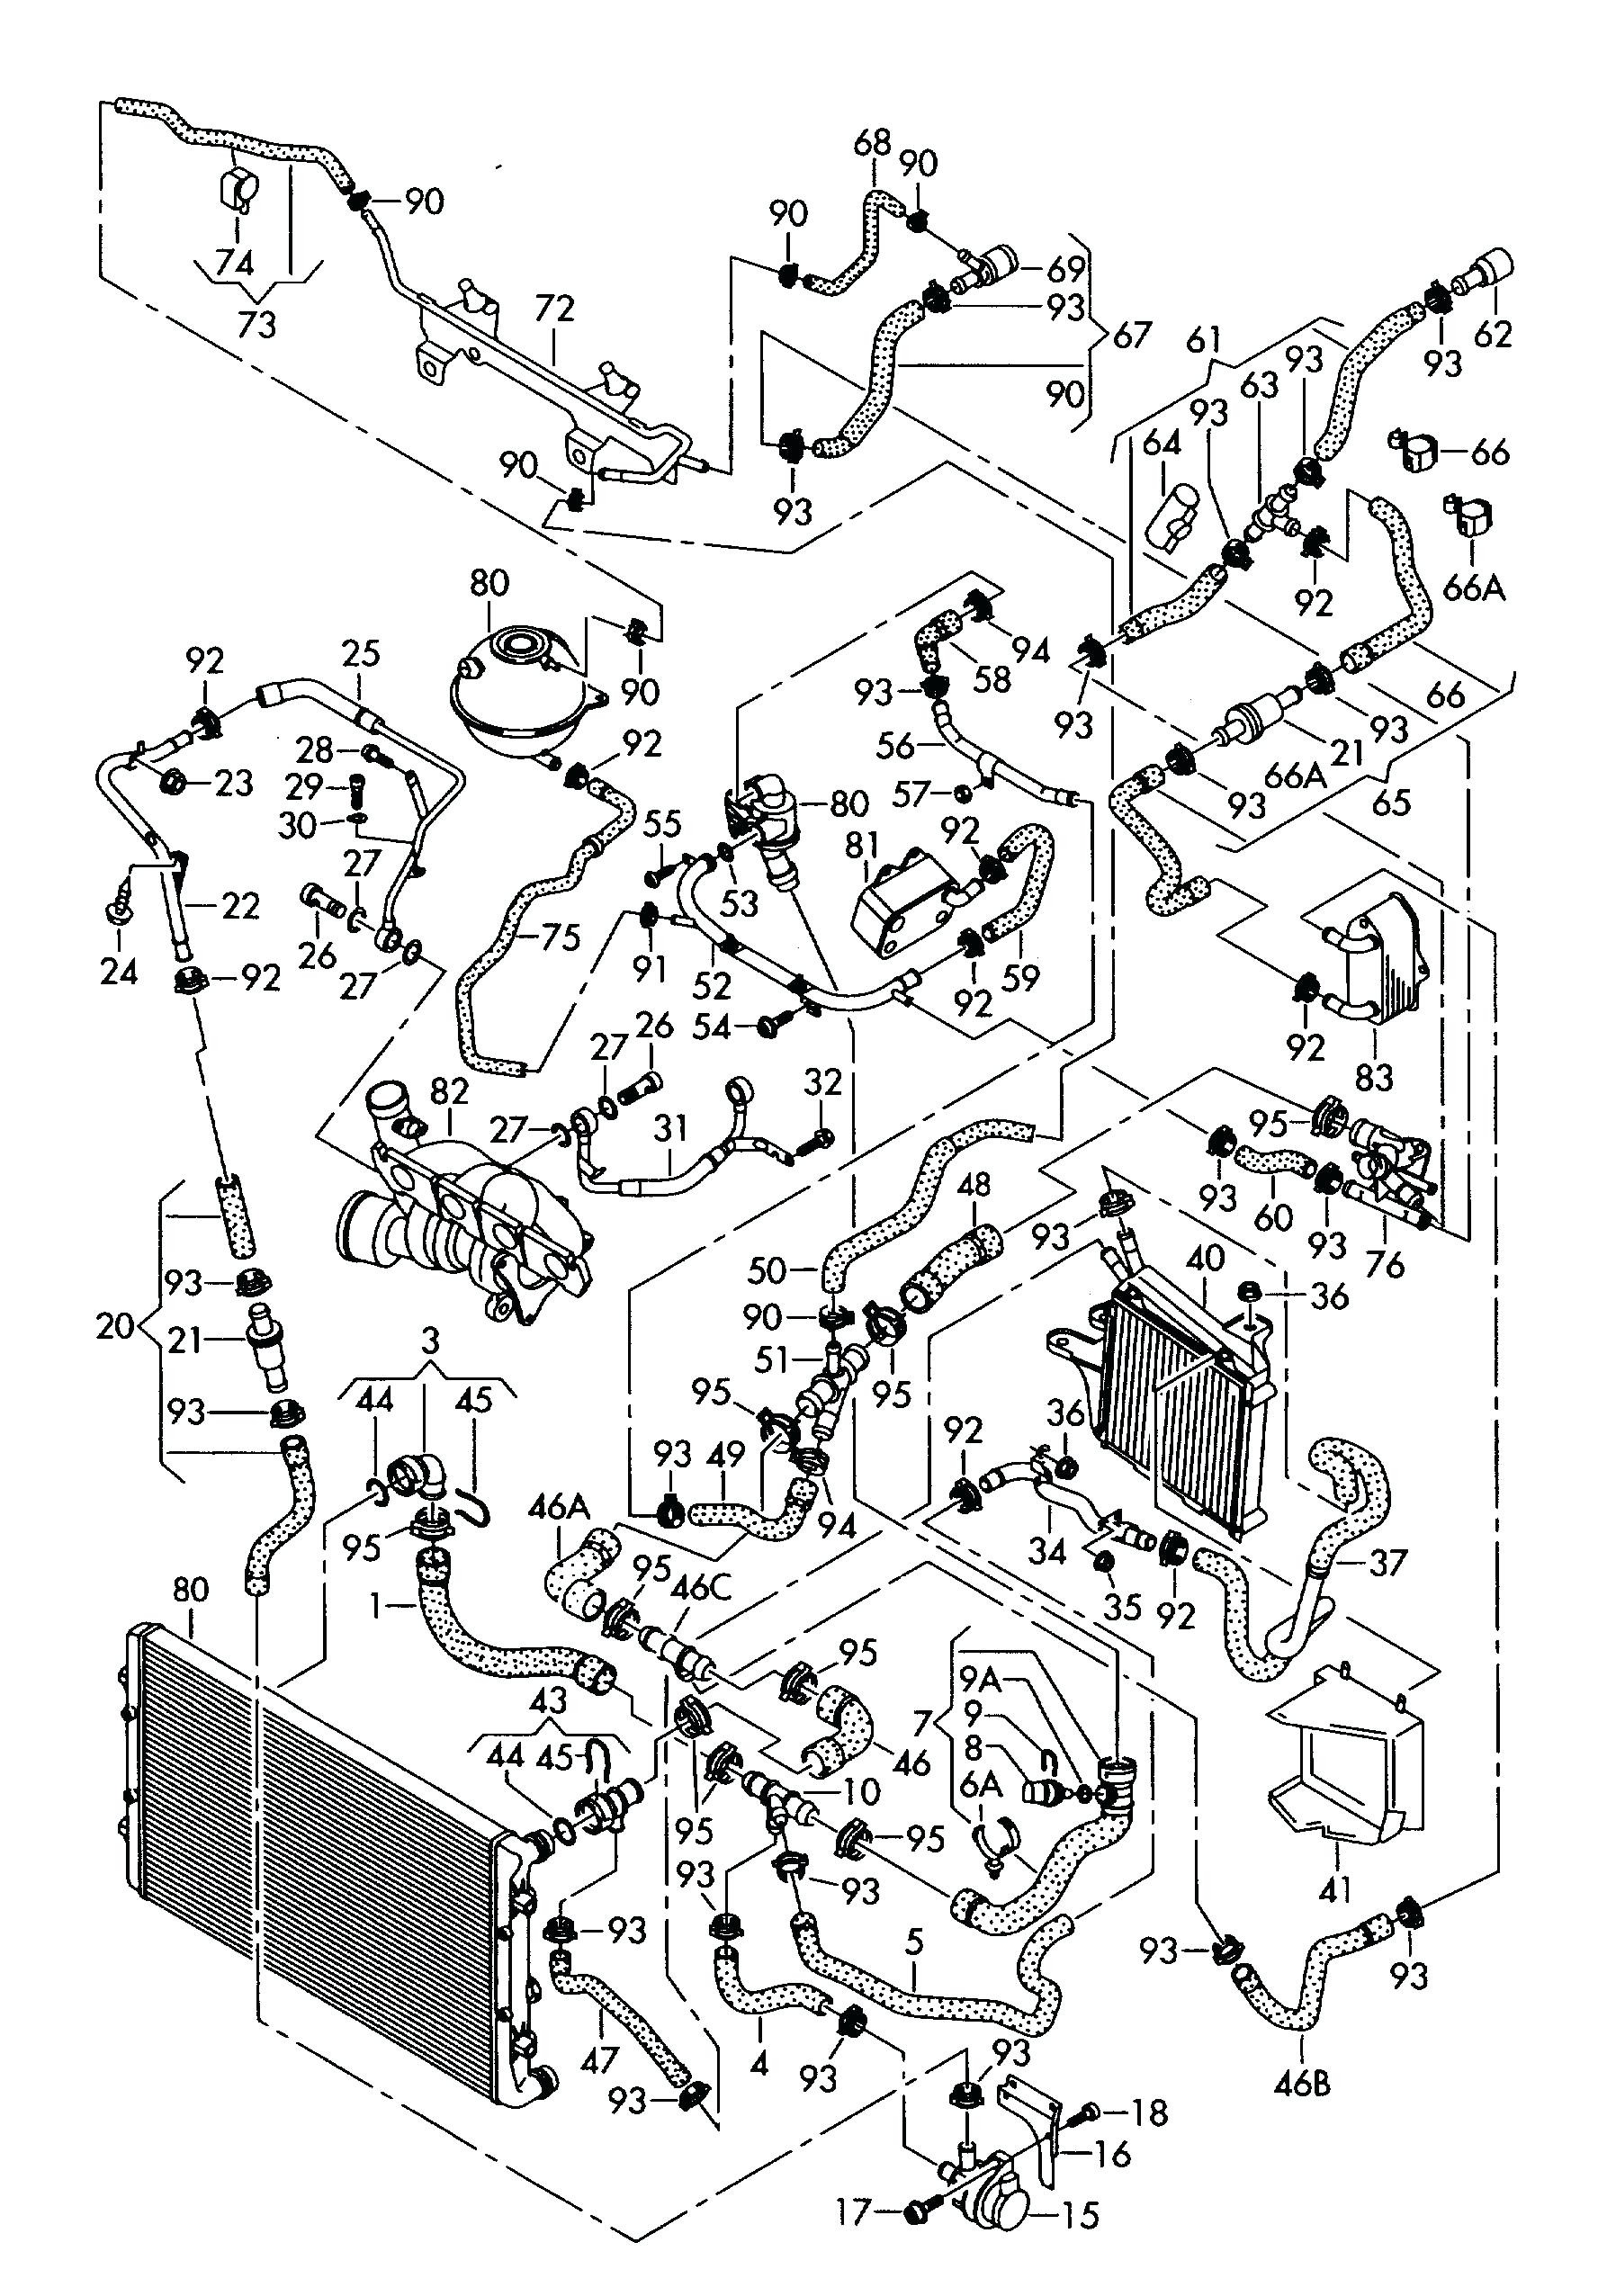 Vw touareg Engine Diagram 2006 touareg Engine Diagram Wiring Wiring Diagrams Instructions Of Vw touareg Engine Diagram